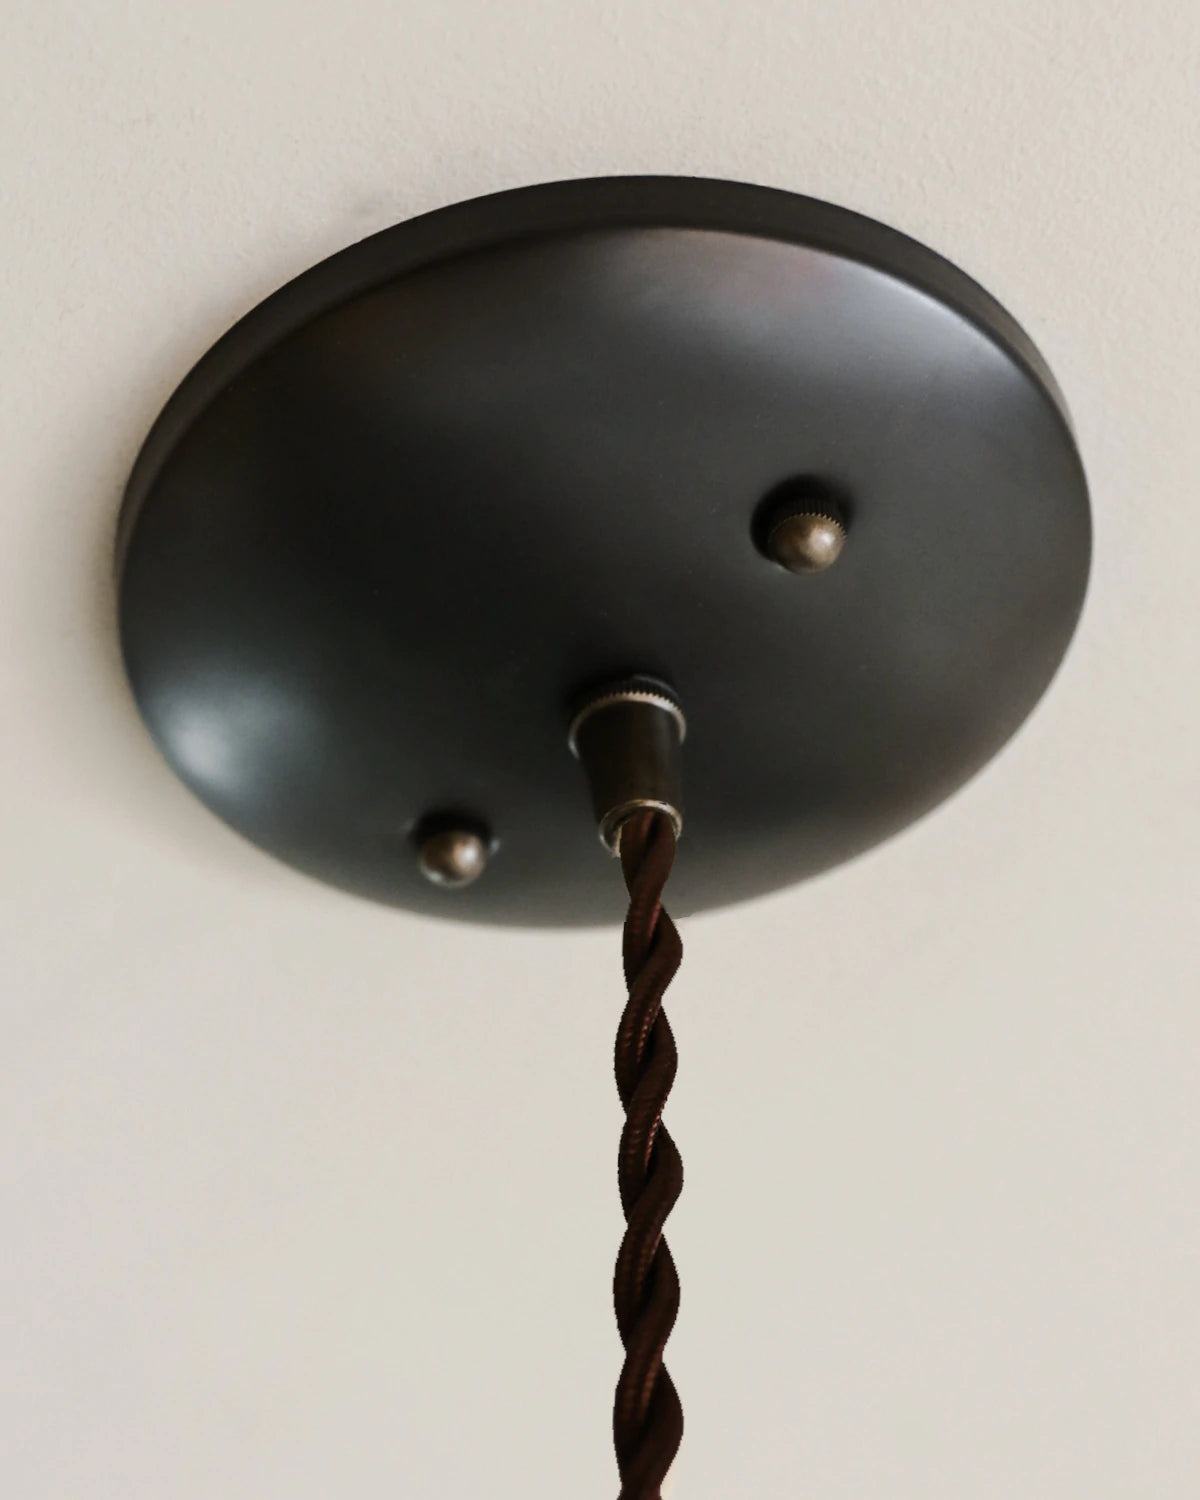 Small Pendant light with clear glass globe and decorative matte black ceramic shade